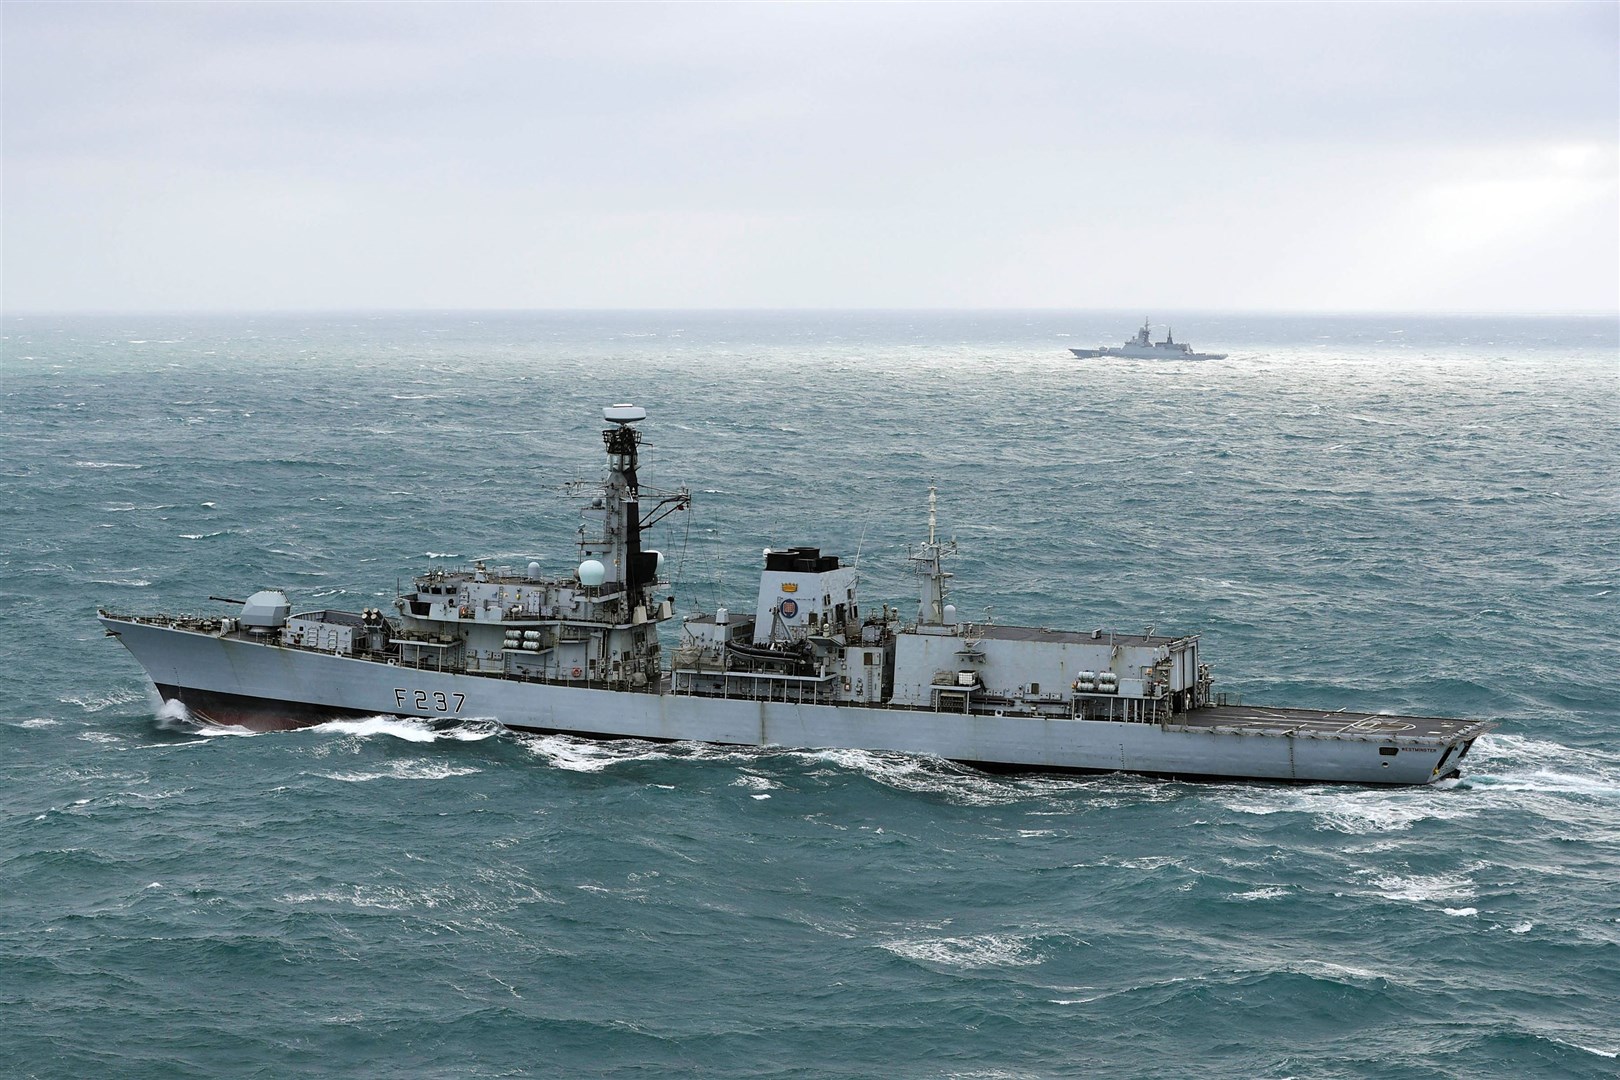 HMS Westminster (foreground) is to be retired (Ministry of Defence/Crown copyright/PA)